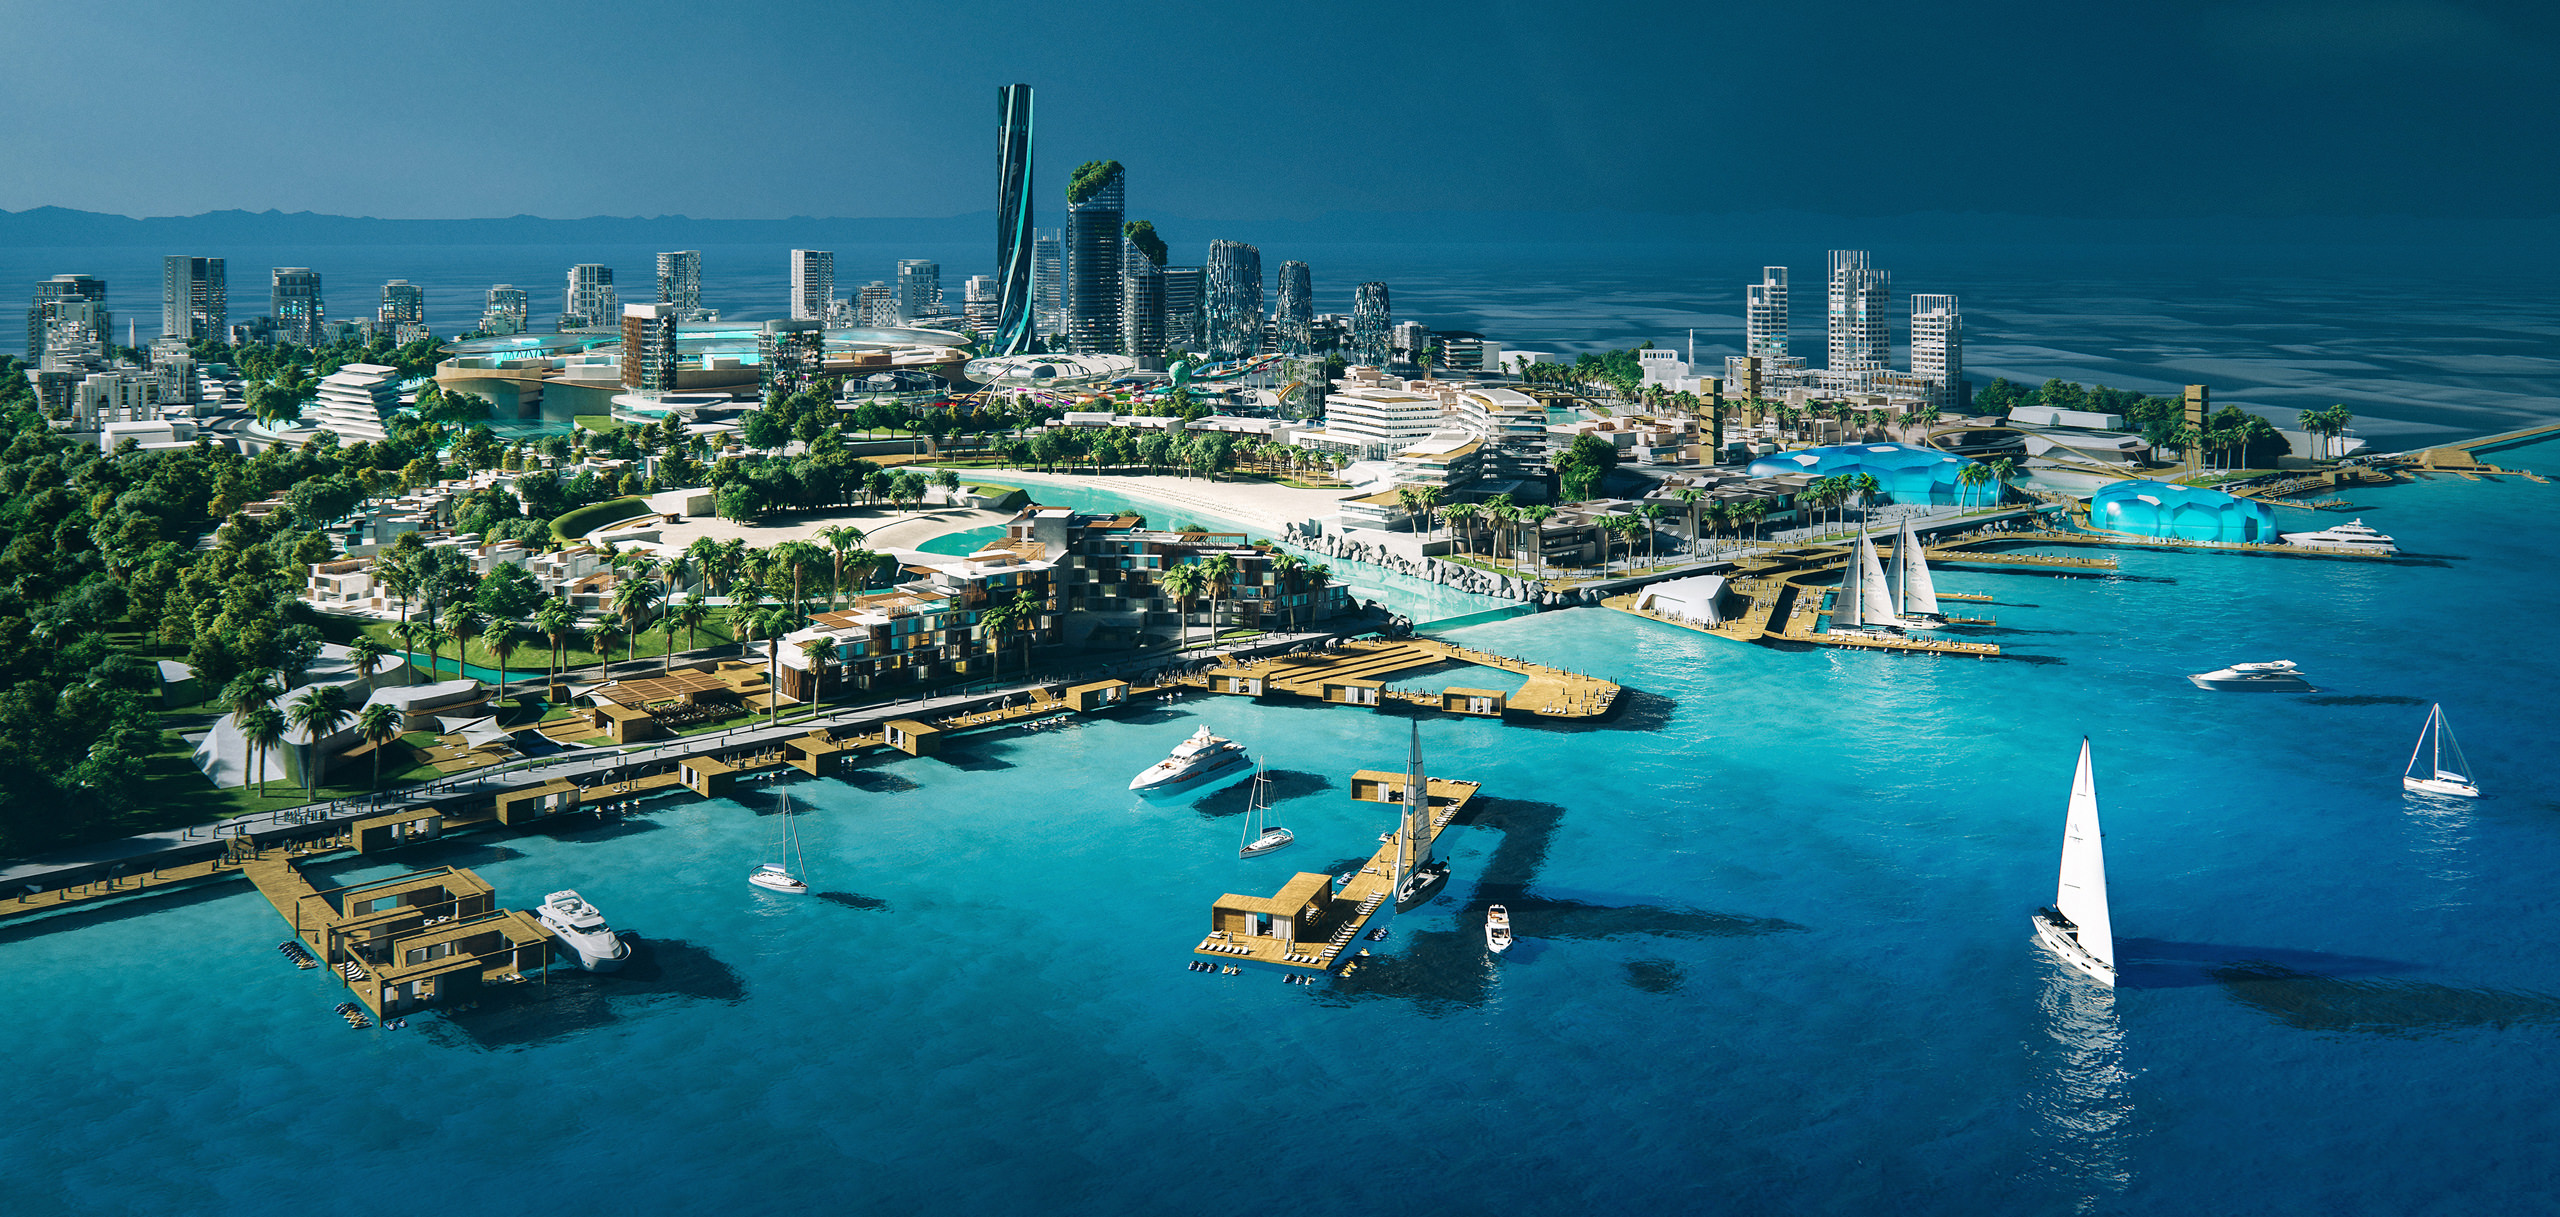 Bird’s eye visualization of residential district with multiple skyscrapers surrounded by greenery rendered by crystal blue waters of the Red Sea